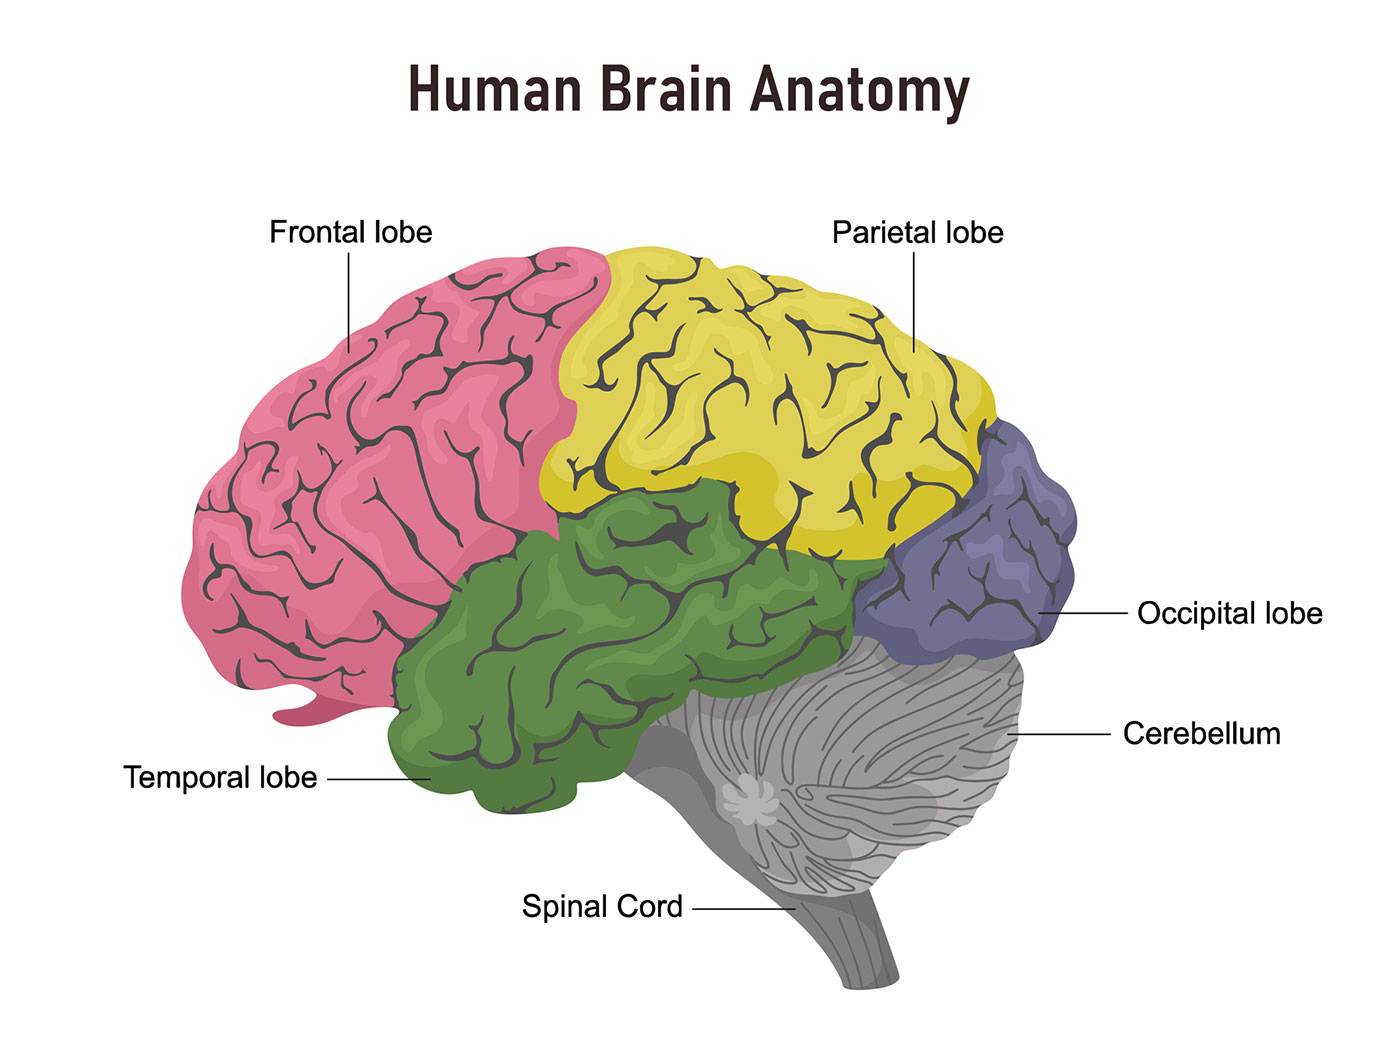 Diagram of the brain's lobes: frontal, temporal, parietal and occipital